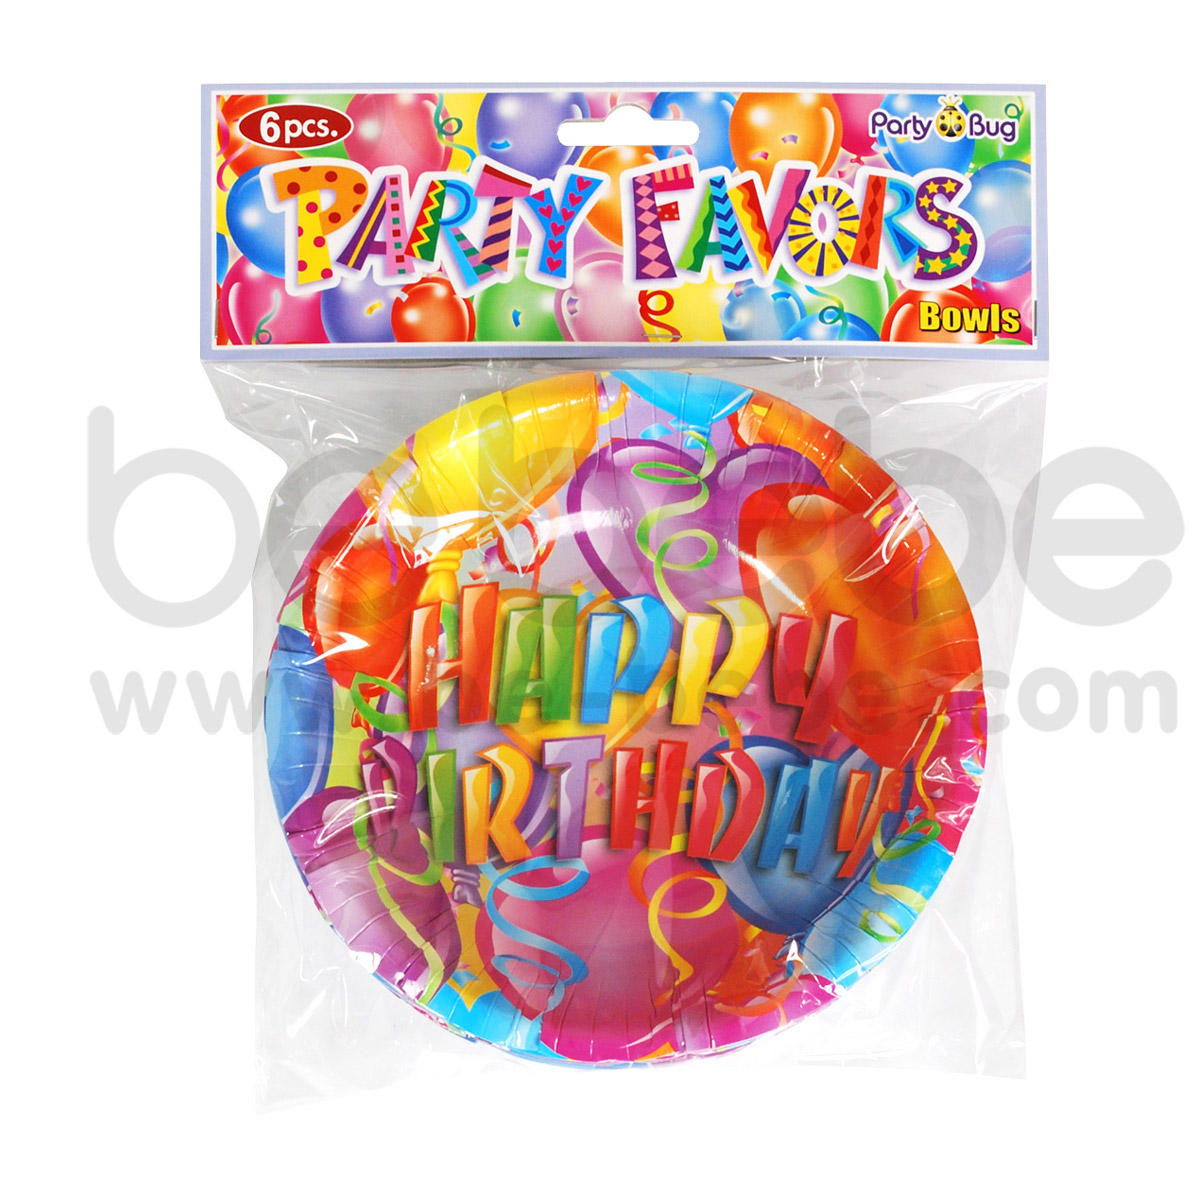 PARTY BUG : Paper bowl 6 inch., 12 Packs